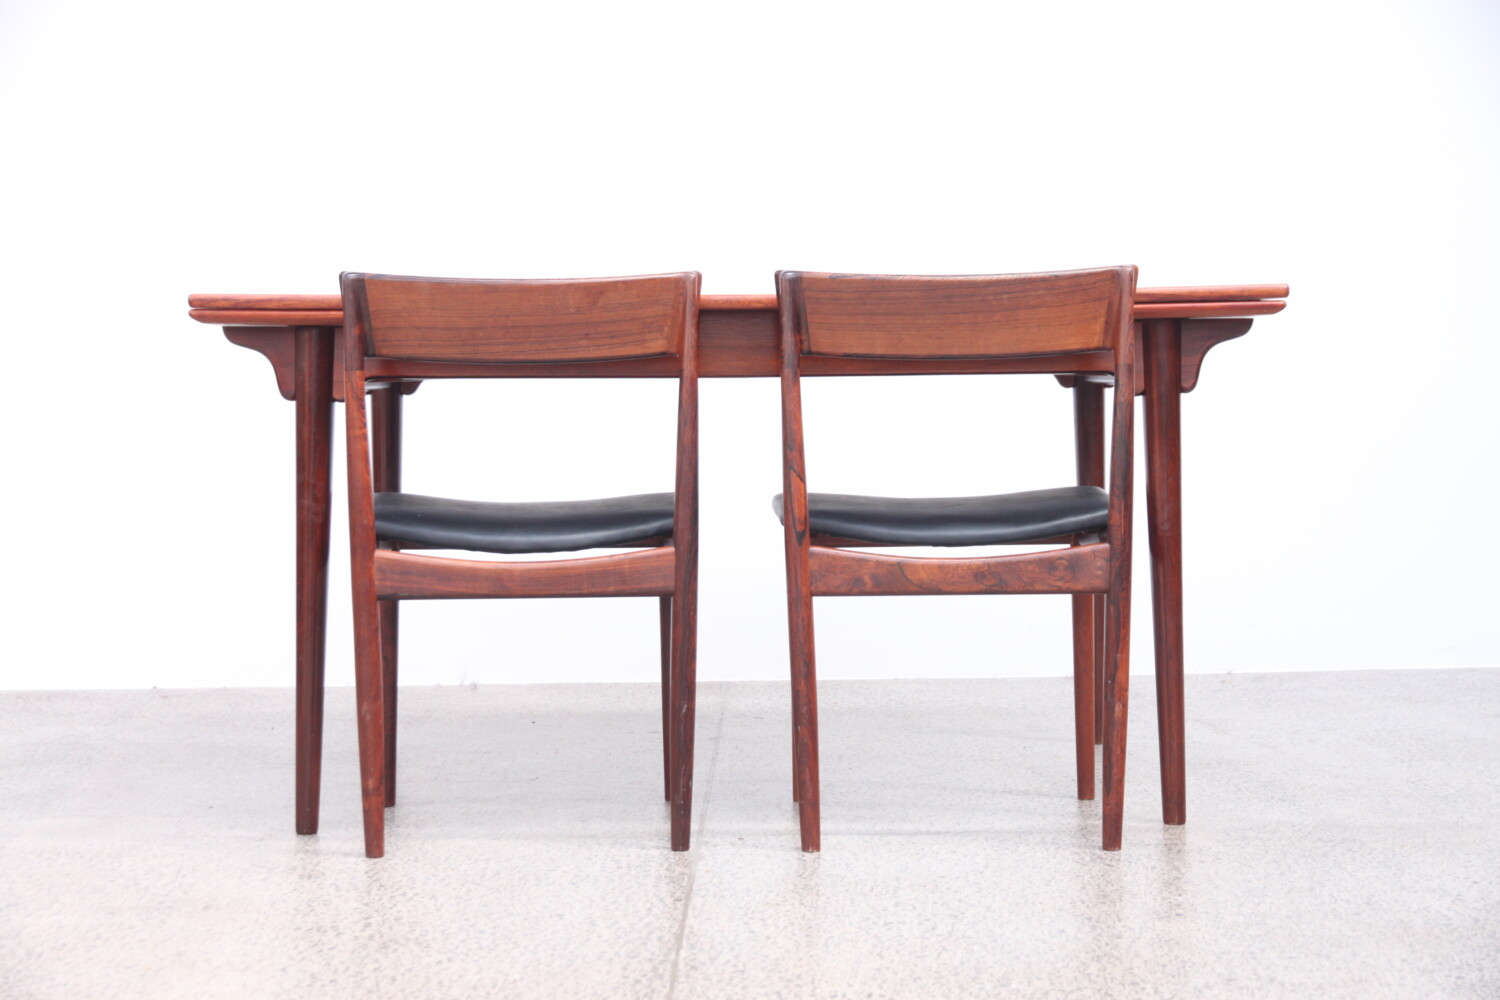 Rosewood Dining Table by Gunni Omann